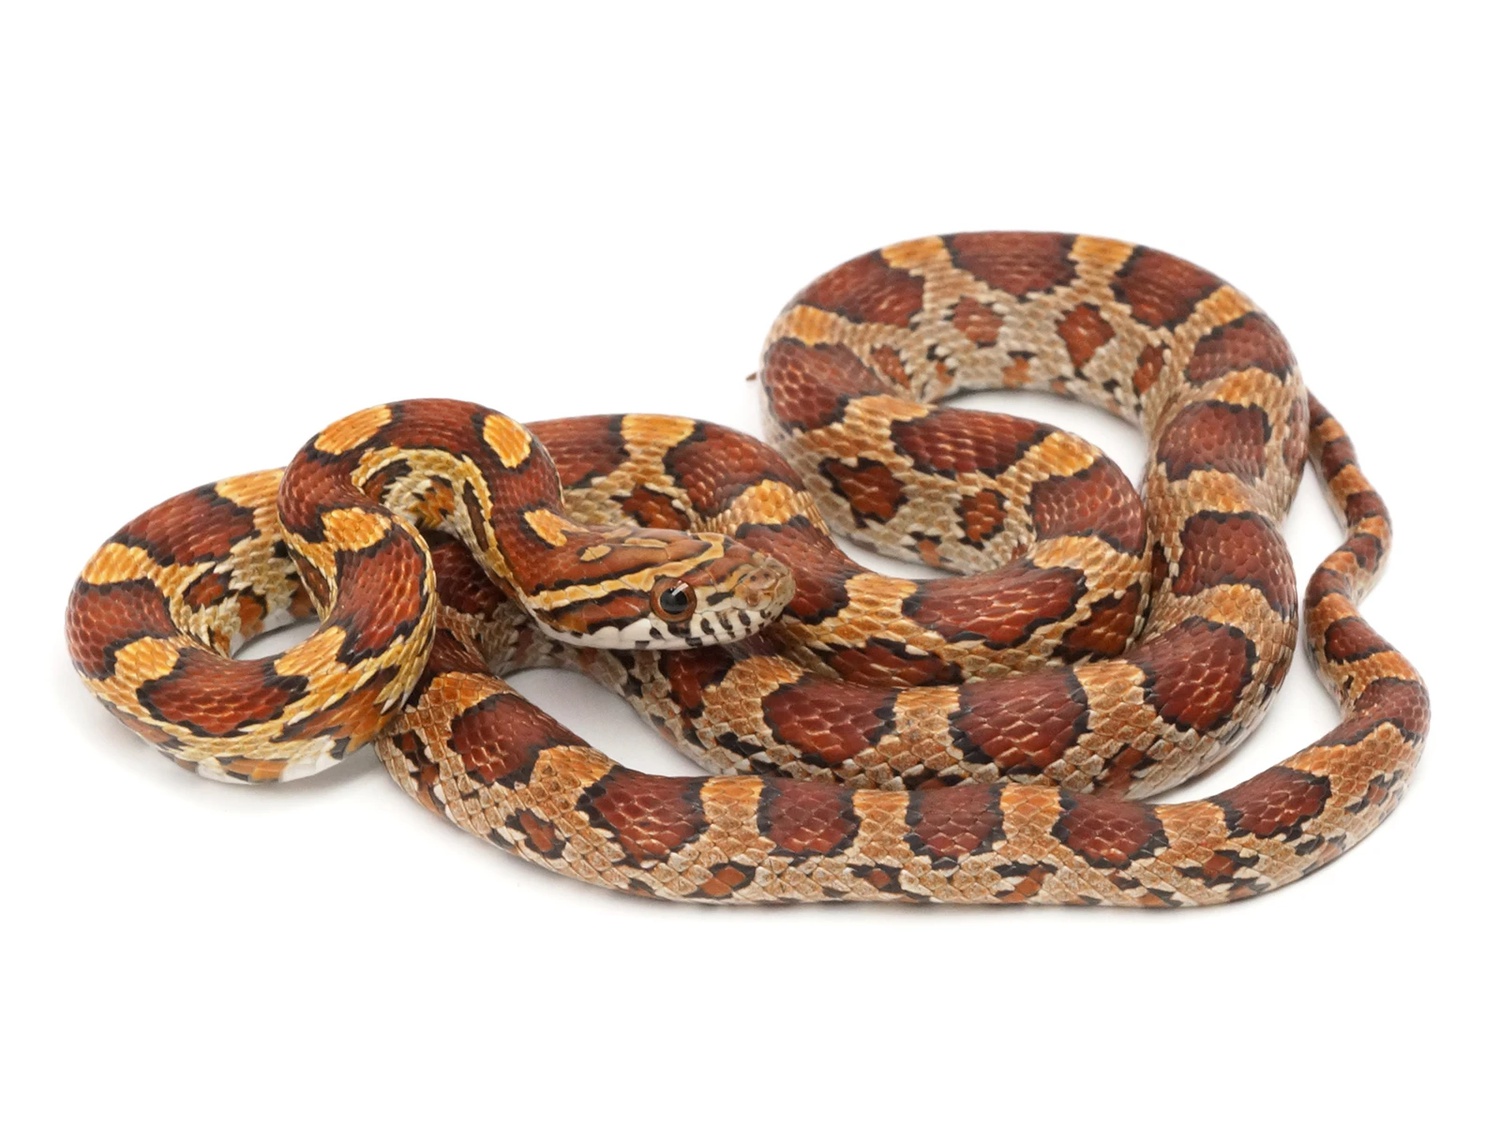 Normal Corn Snake by New England Reptile Distributors